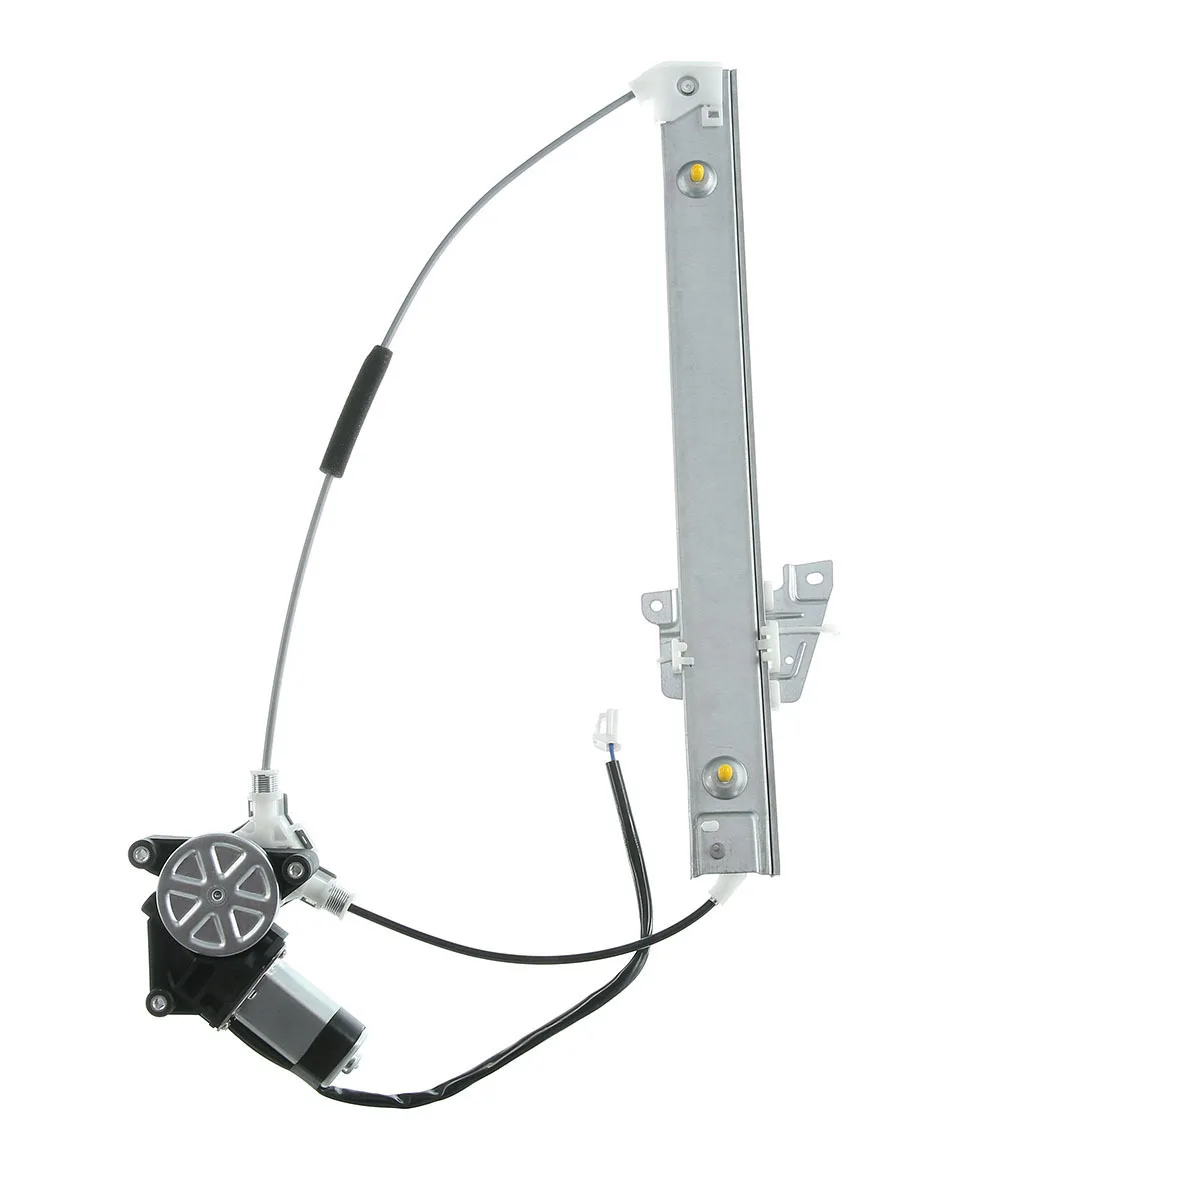 

In-stock CN US Power Electric Window Regulator with Motor for Mazda MPV 2000-2006 Rear Passenger MA1551113